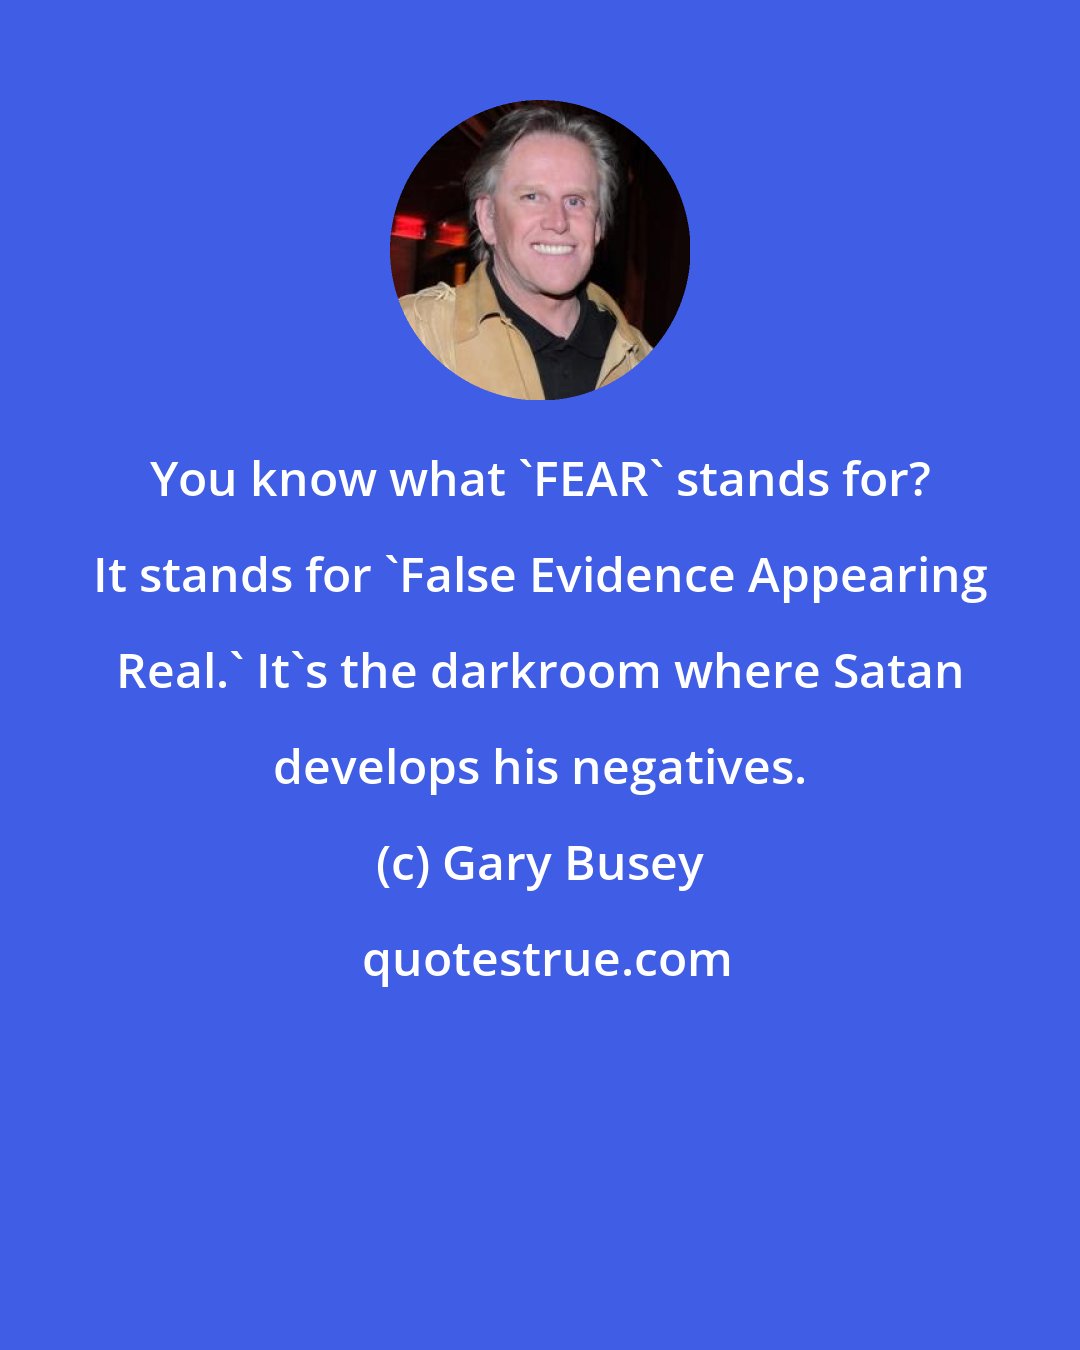 Gary Busey: You know what 'FEAR' stands for? It stands for 'False Evidence Appearing Real.' It's the darkroom where Satan develops his negatives.